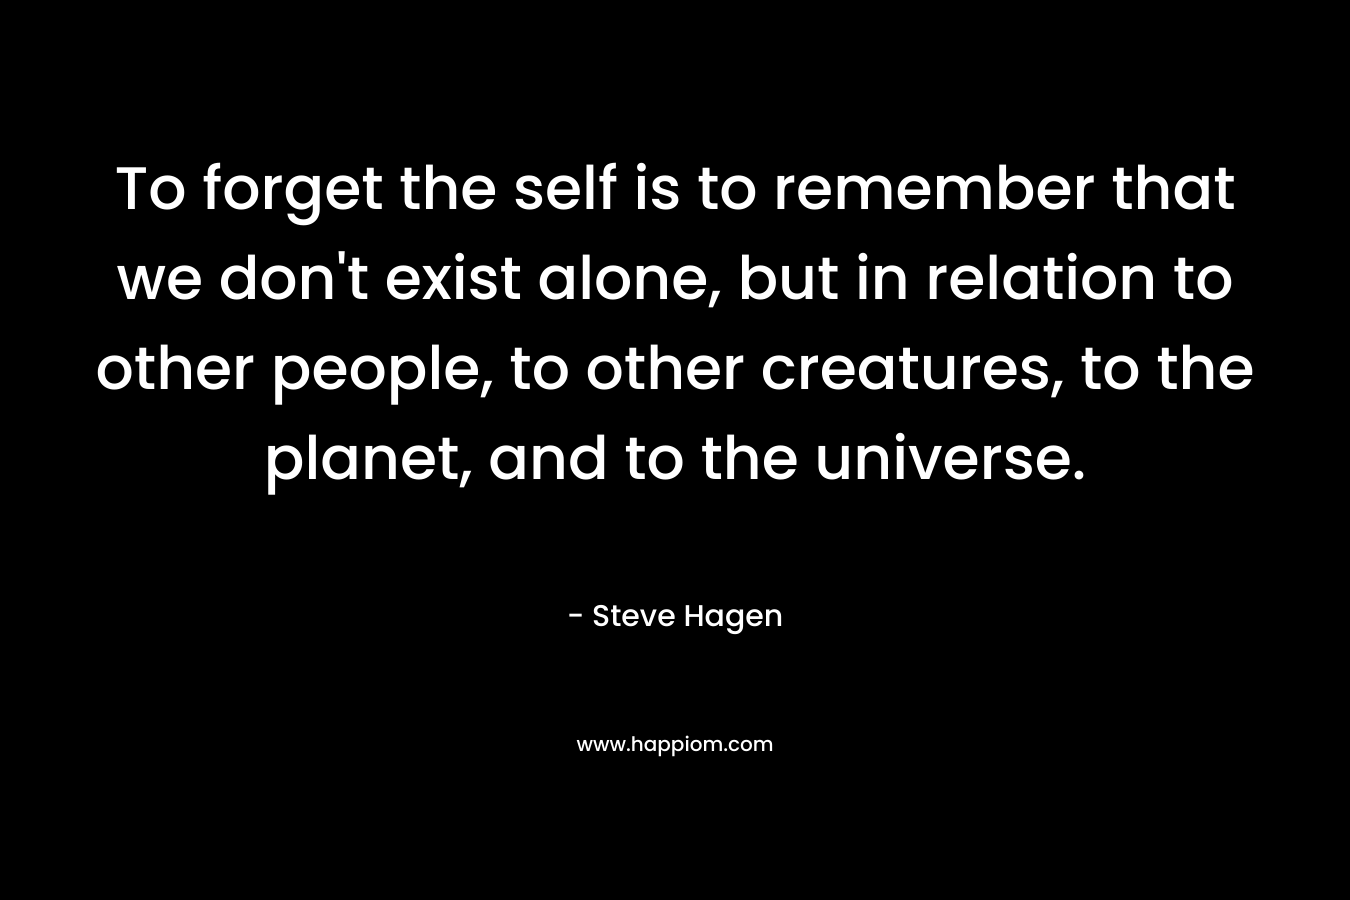 To forget the self is to remember that we don't exist alone, but in relation to other people, to other creatures, to the planet, and to the universe.